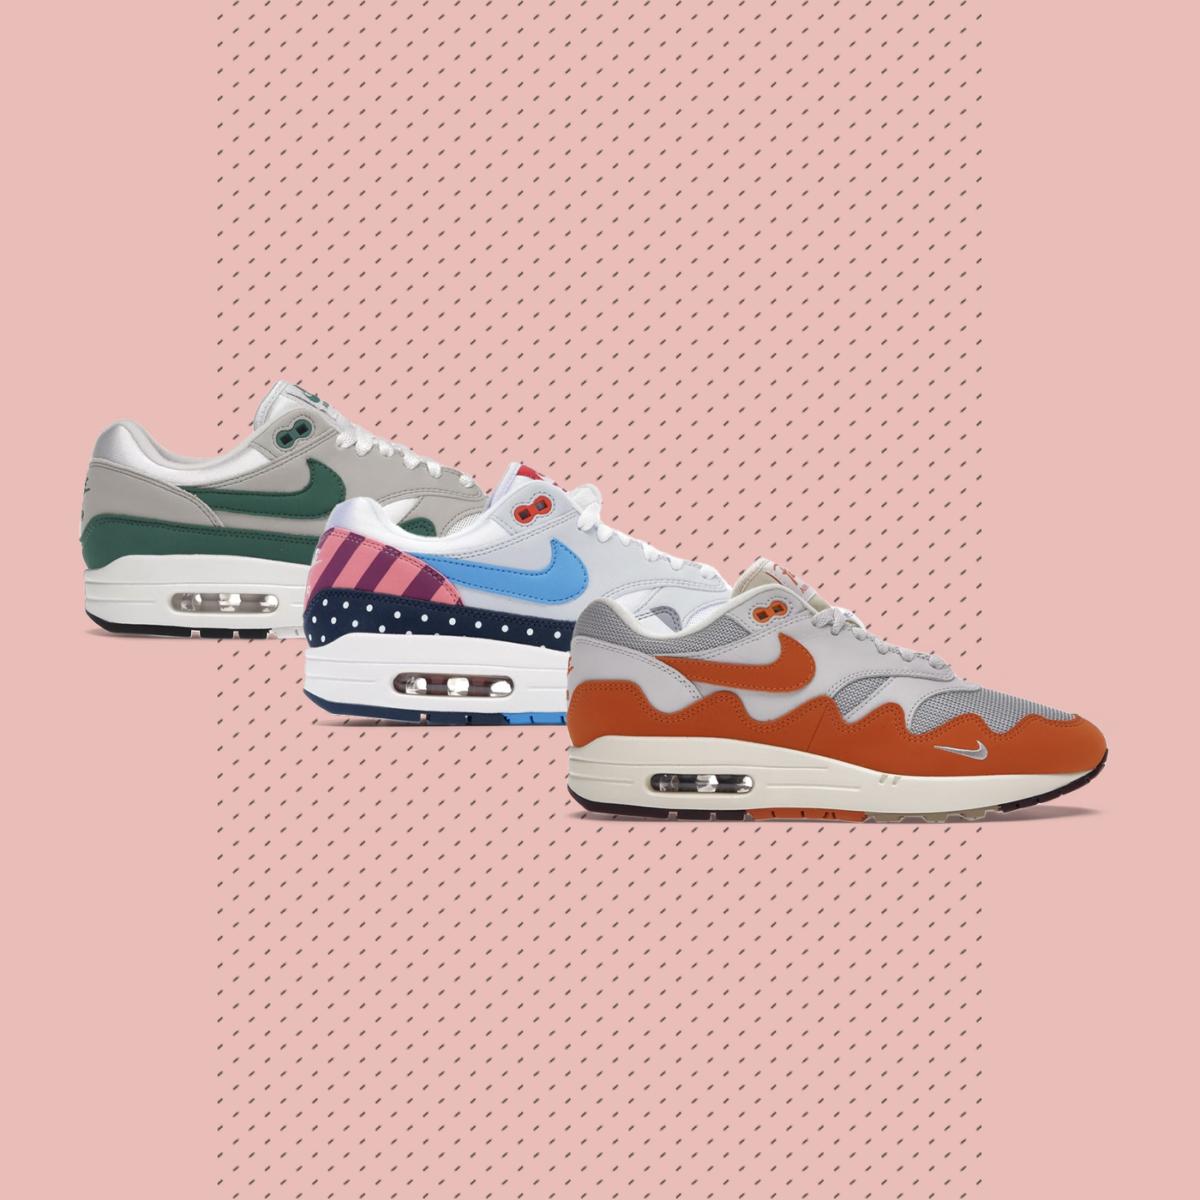 The size? Exclusive Nike Air Max 1 Releases In September